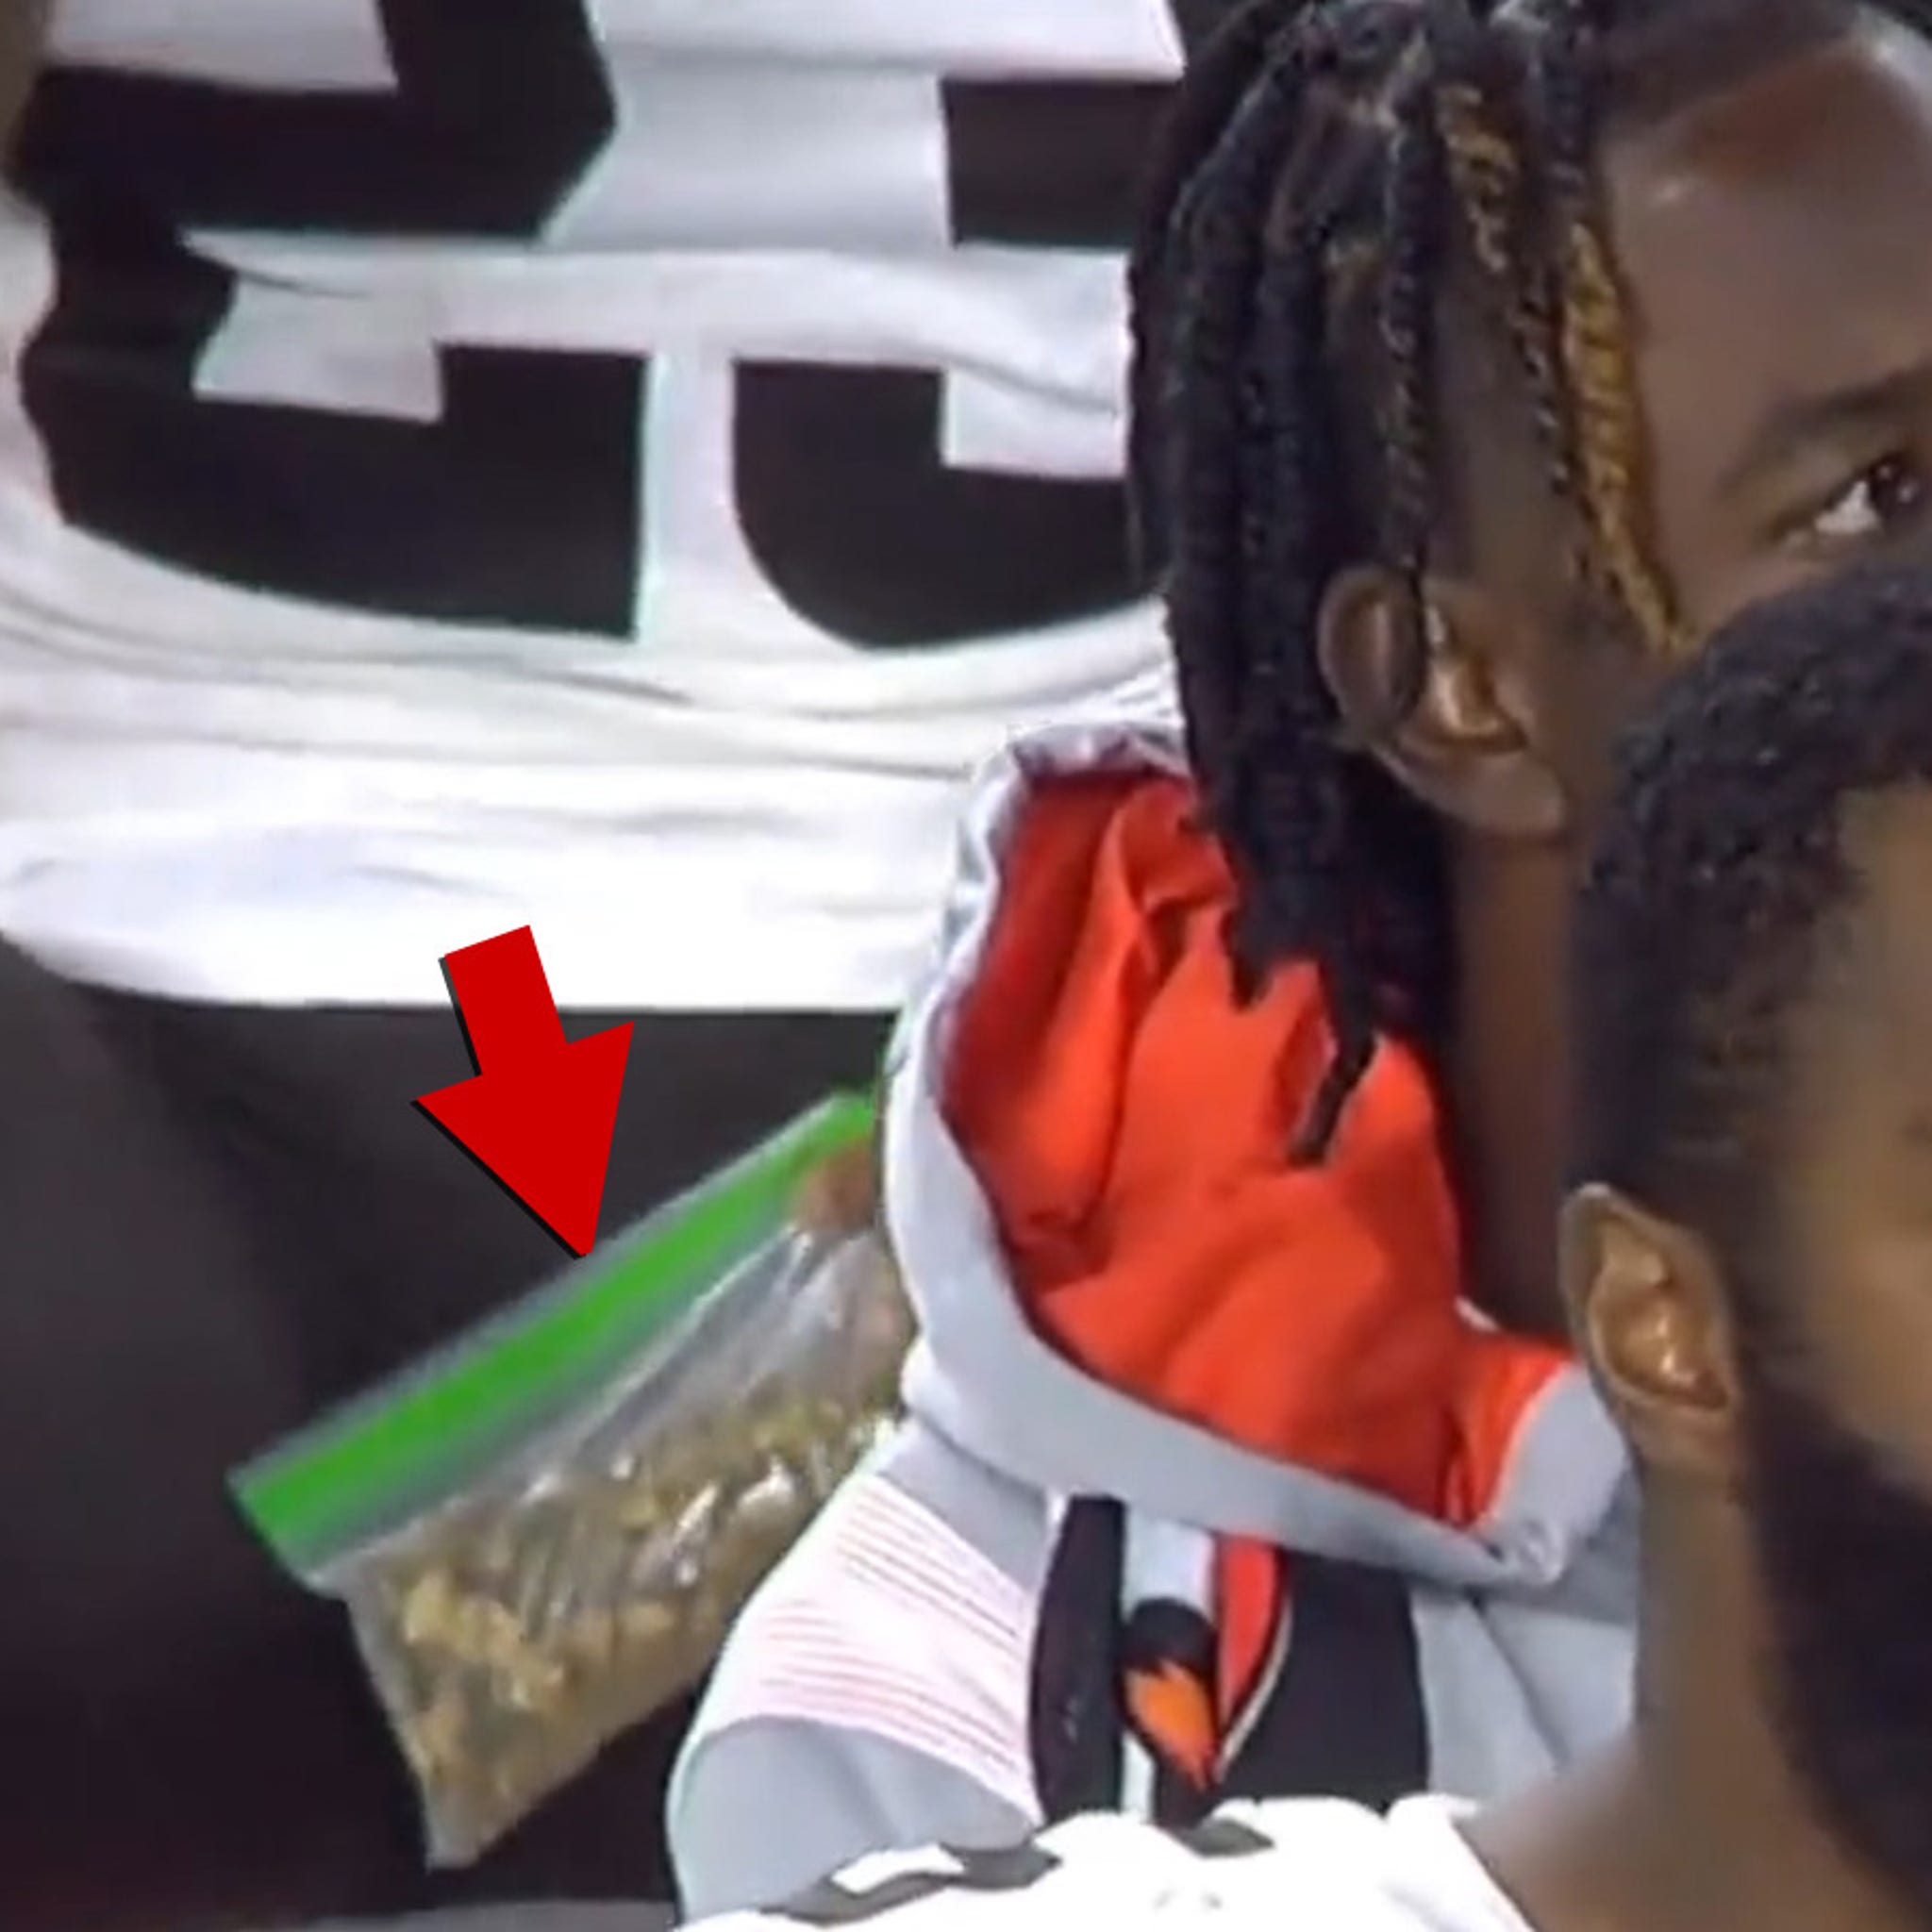 Browns Player Was Holding Sunflower Seeds, Not Weed, On Sidelines At Game